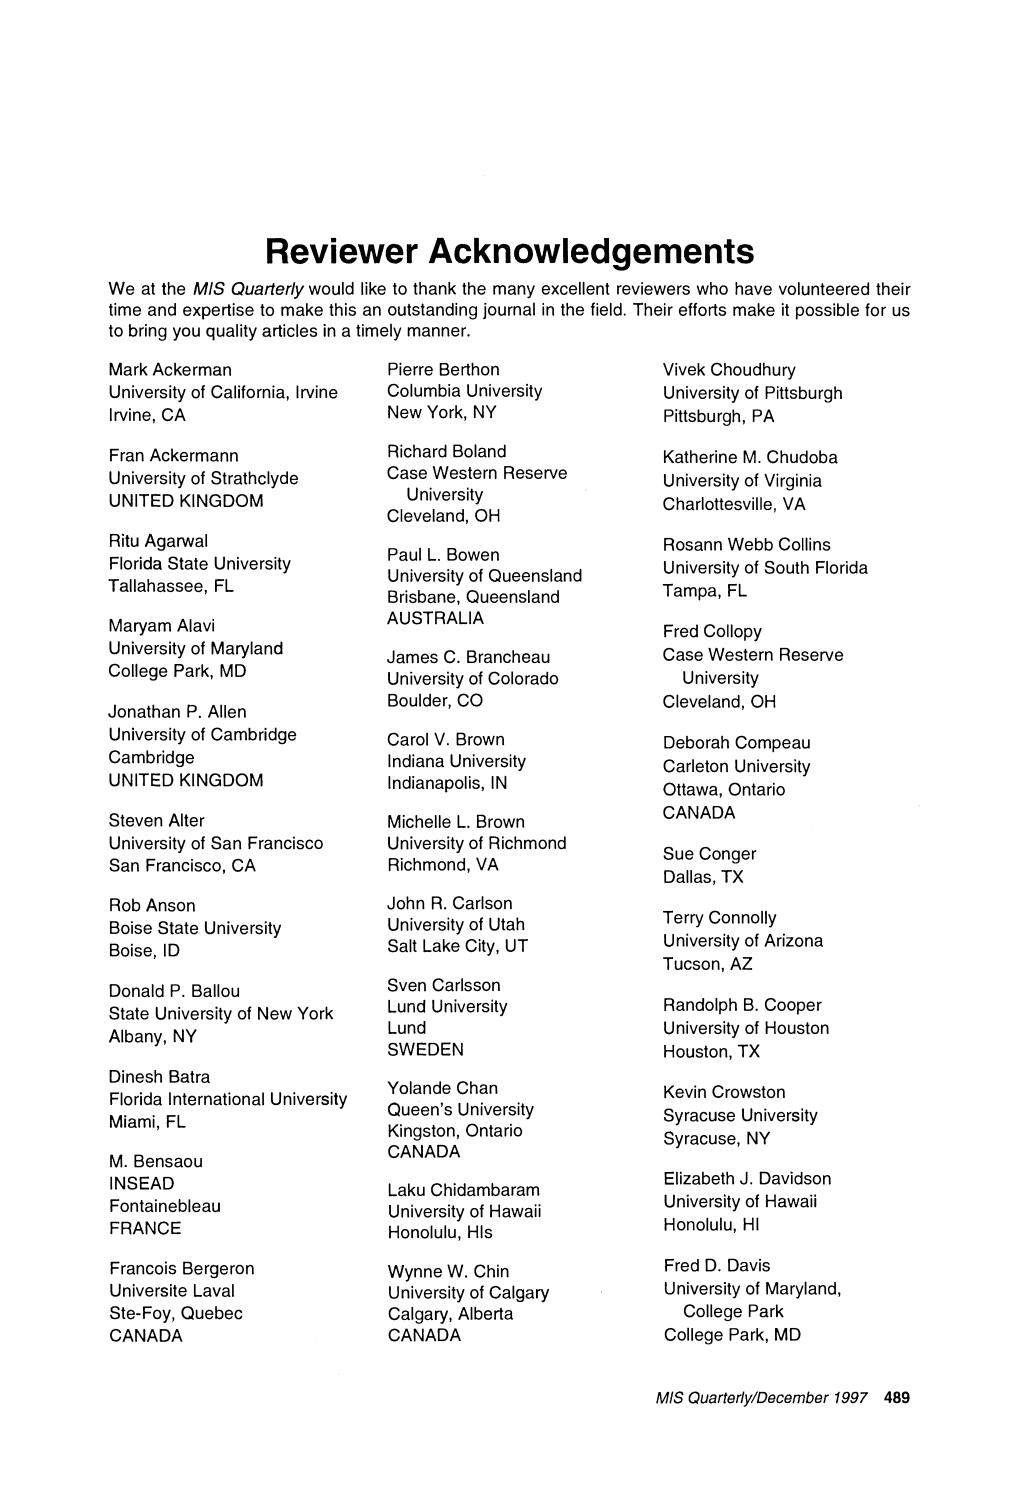 Reviewer Acknowledgments, 1997